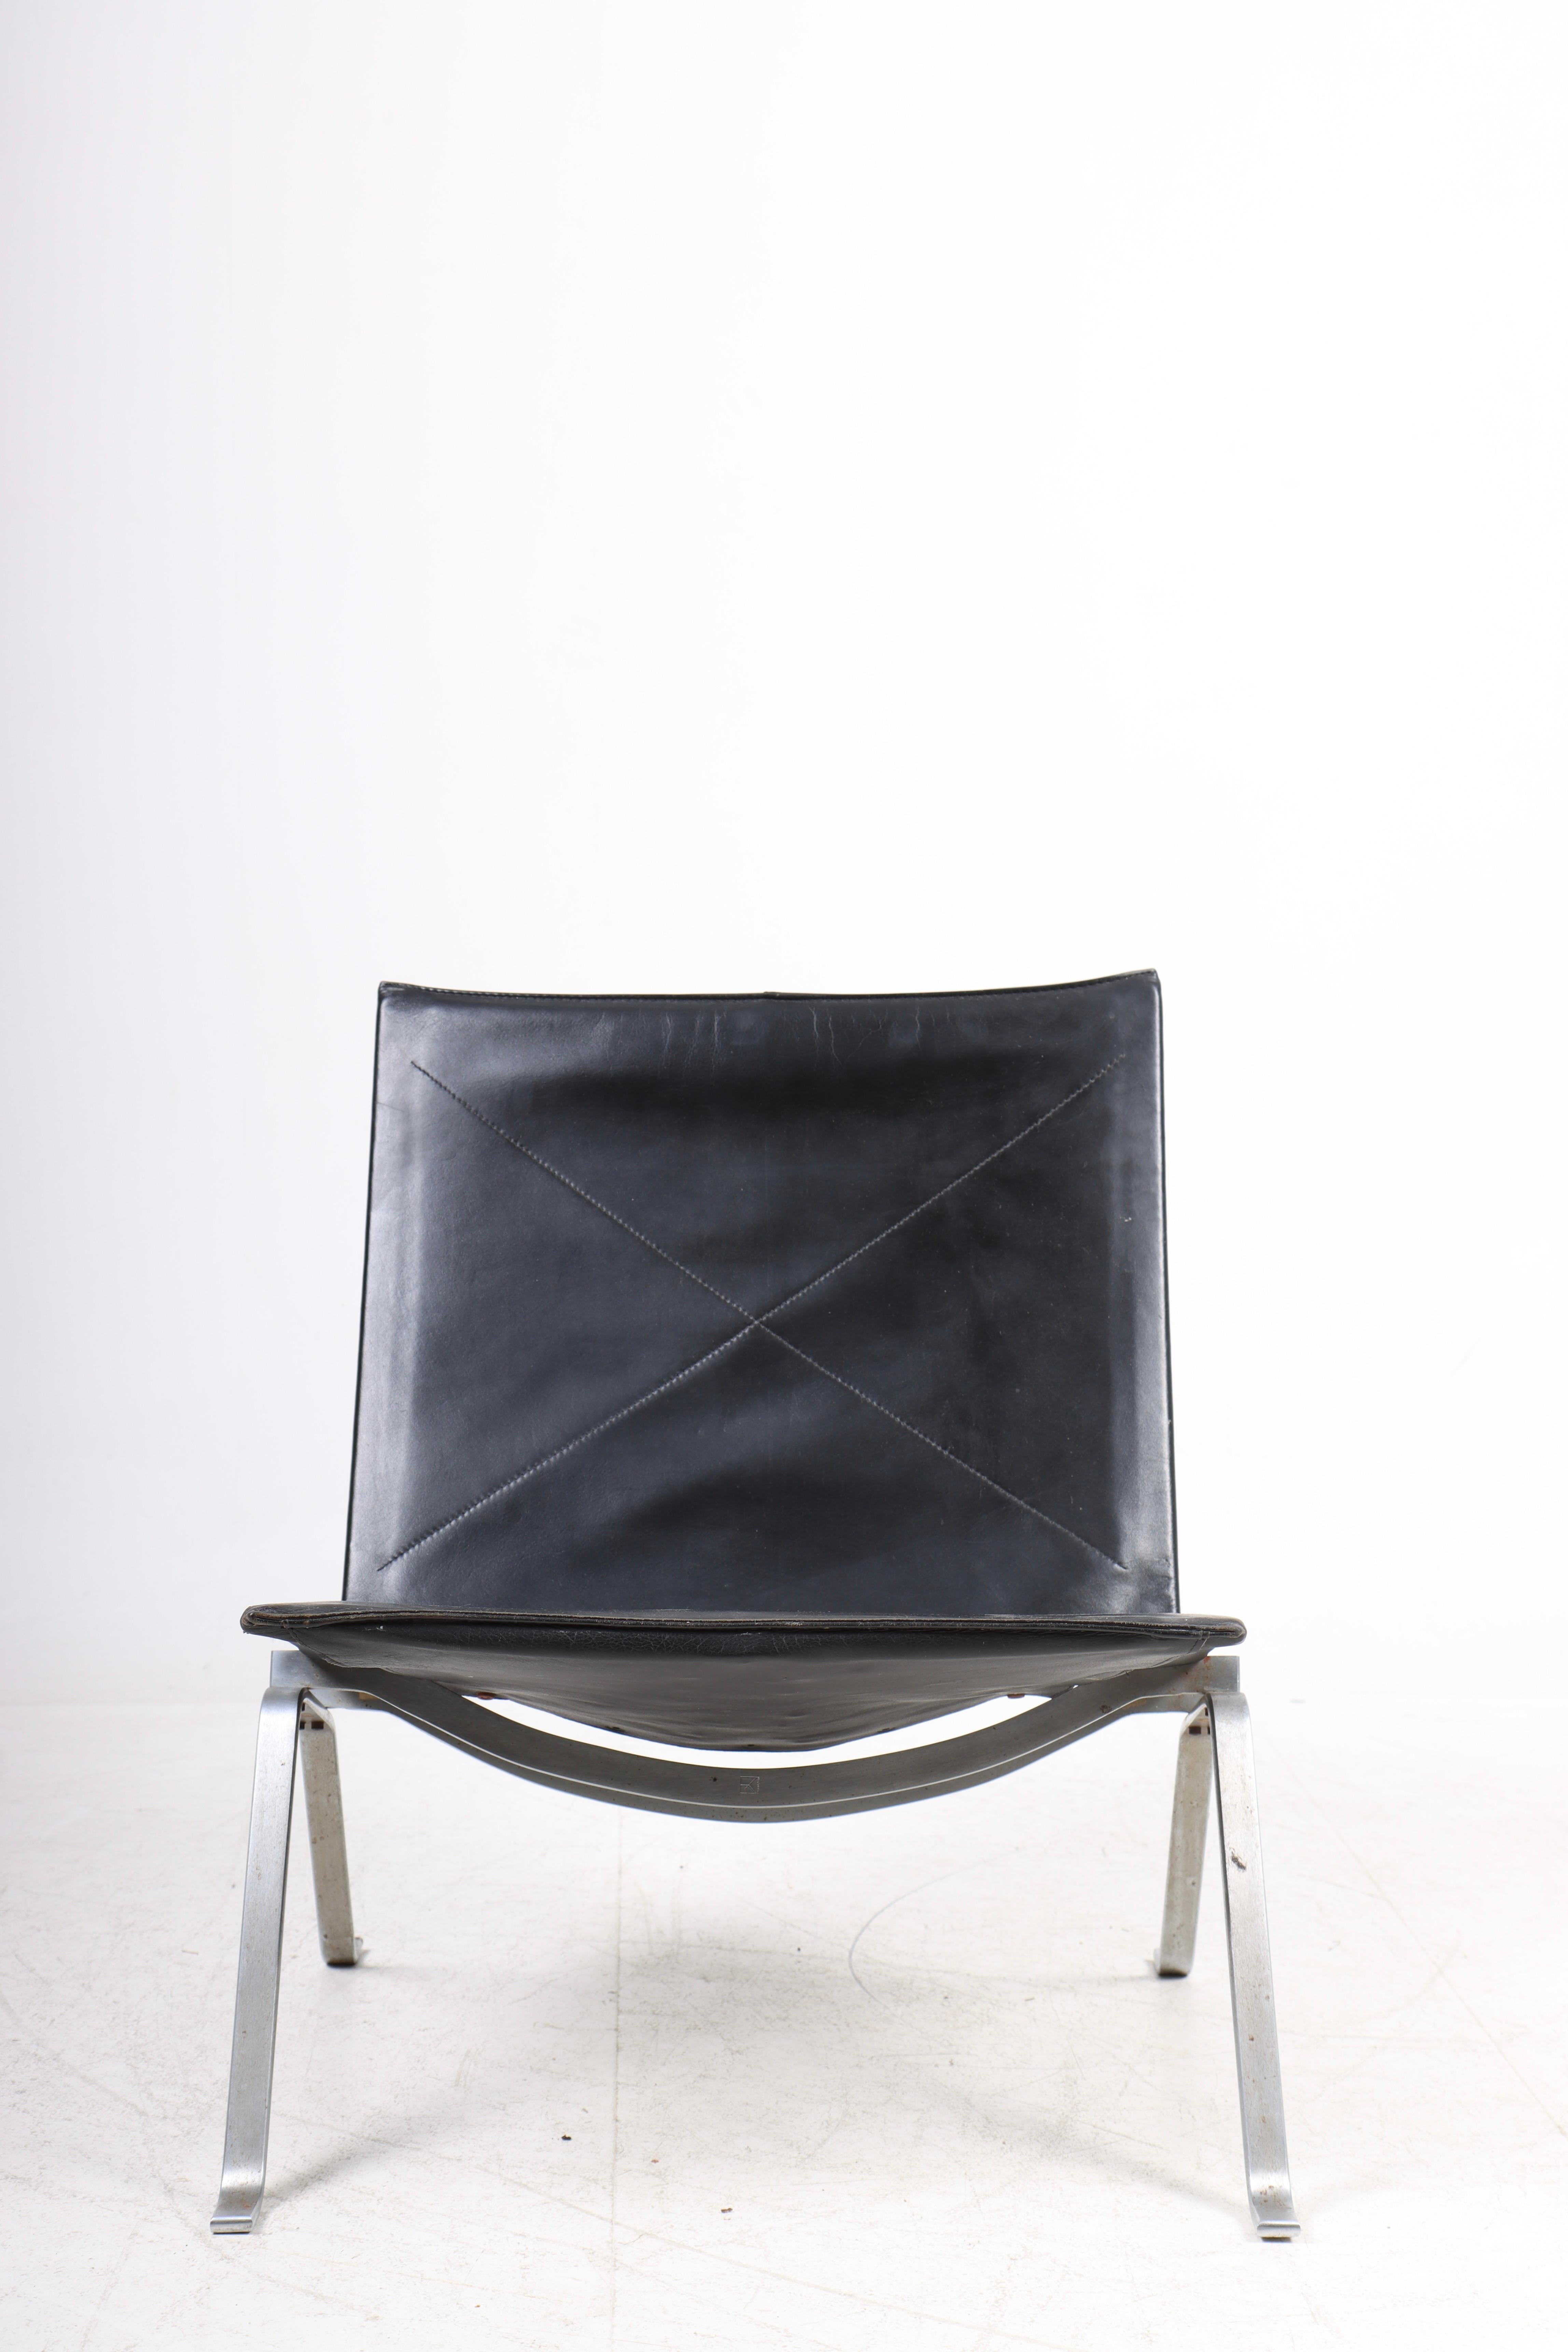 Great looking PK22 lounge chair in patinated leather. Designed by Maa. Poul Kjærholm for Kold Christensen. Made in Denmark. Original condition.